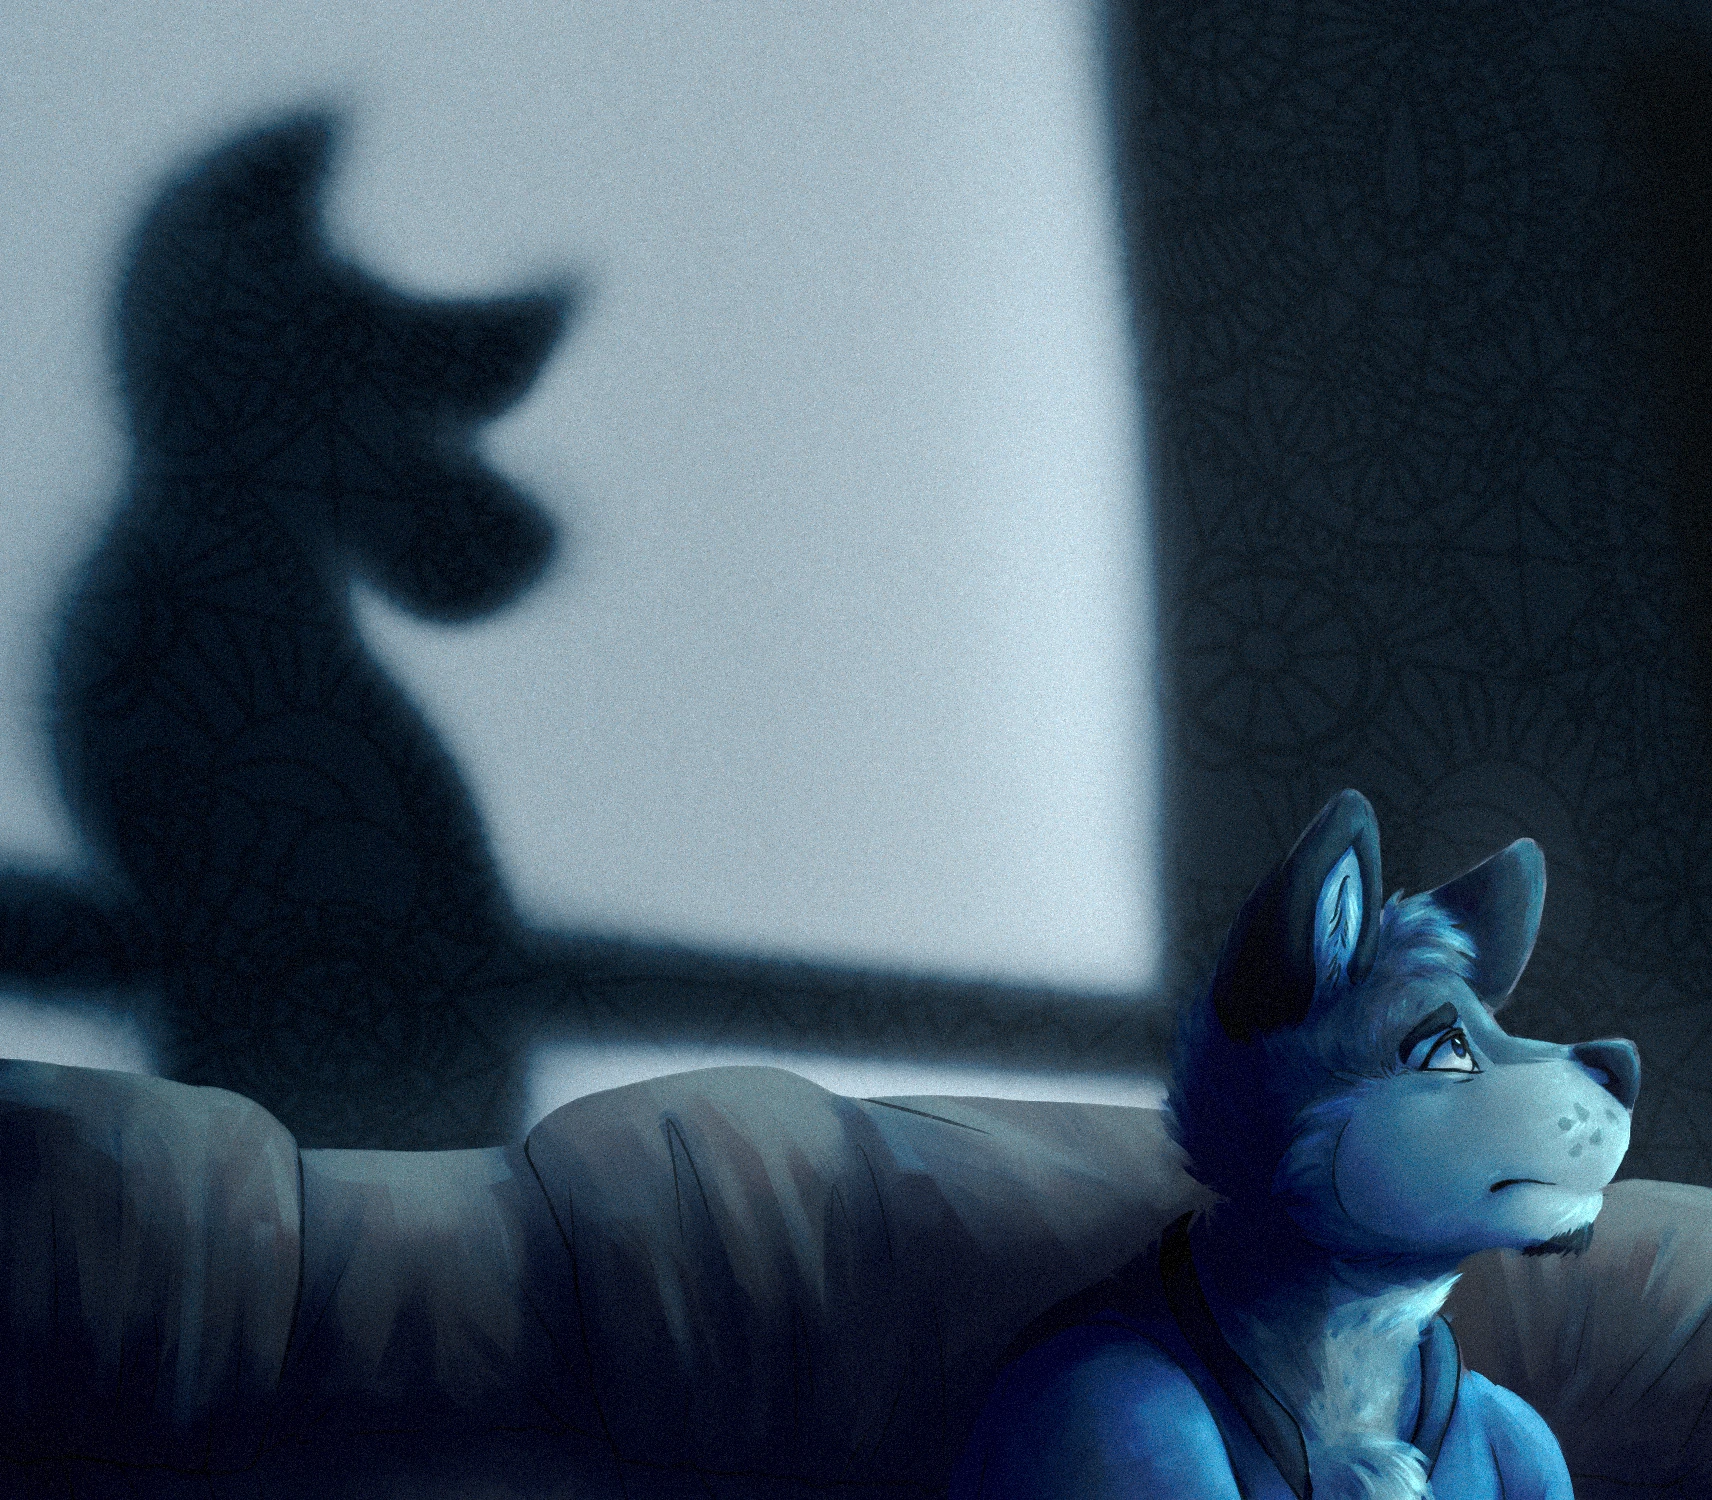 Still a part of the image, this time focusing on the shadow on the wall behind the canine.